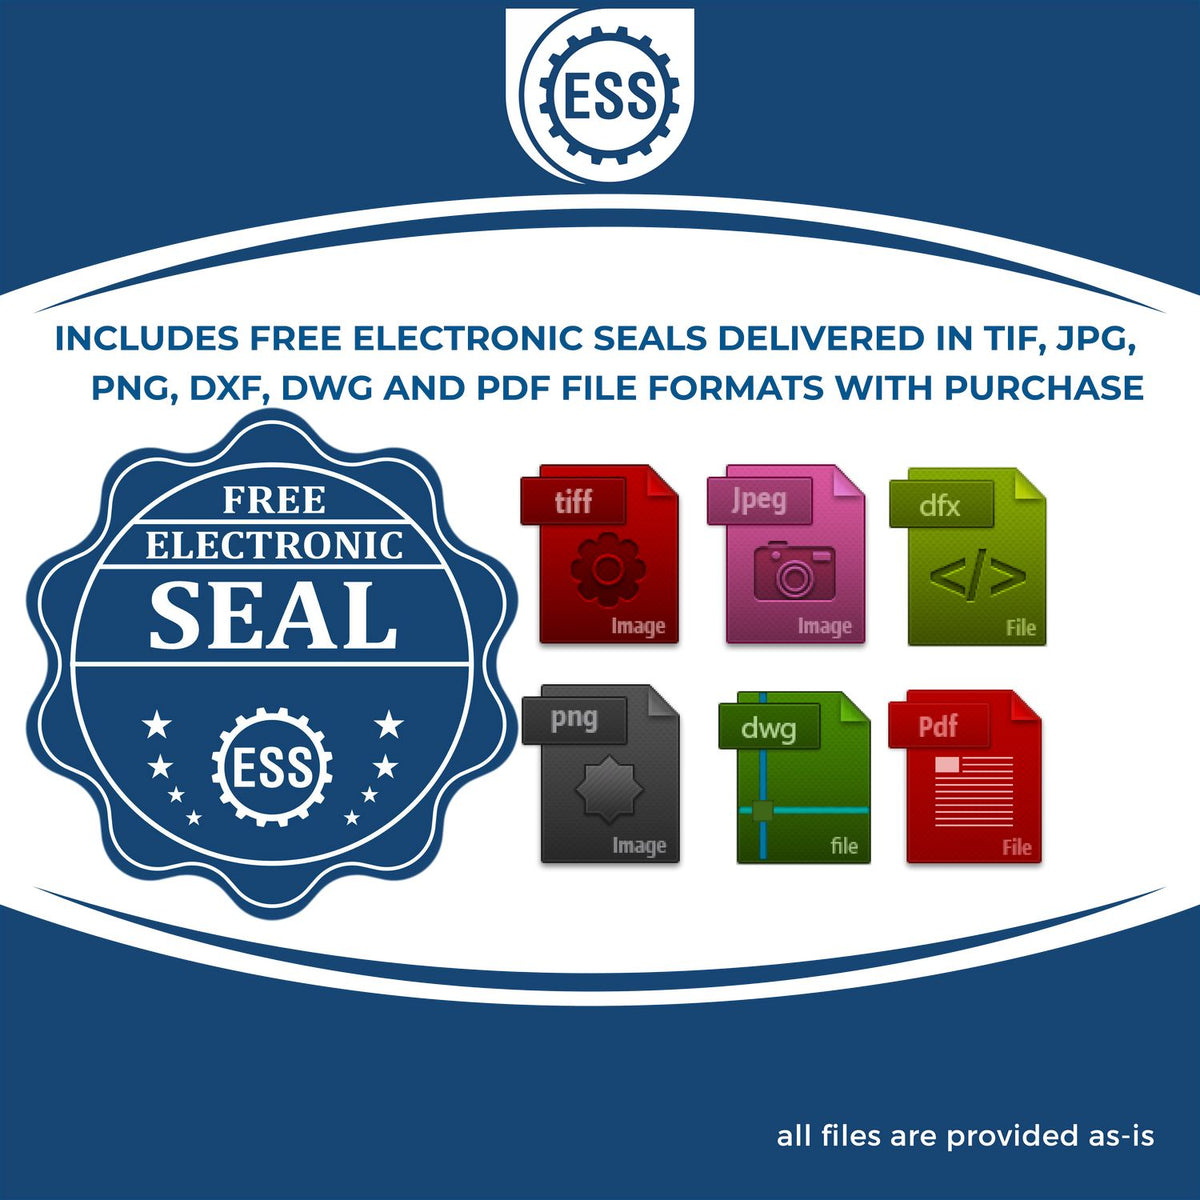 An infographic for the free electronic seal for the Gift Indiana Land Surveyor Seal illustrating the different file type icons such as DXF, DWG, TIF, JPG and PNG.